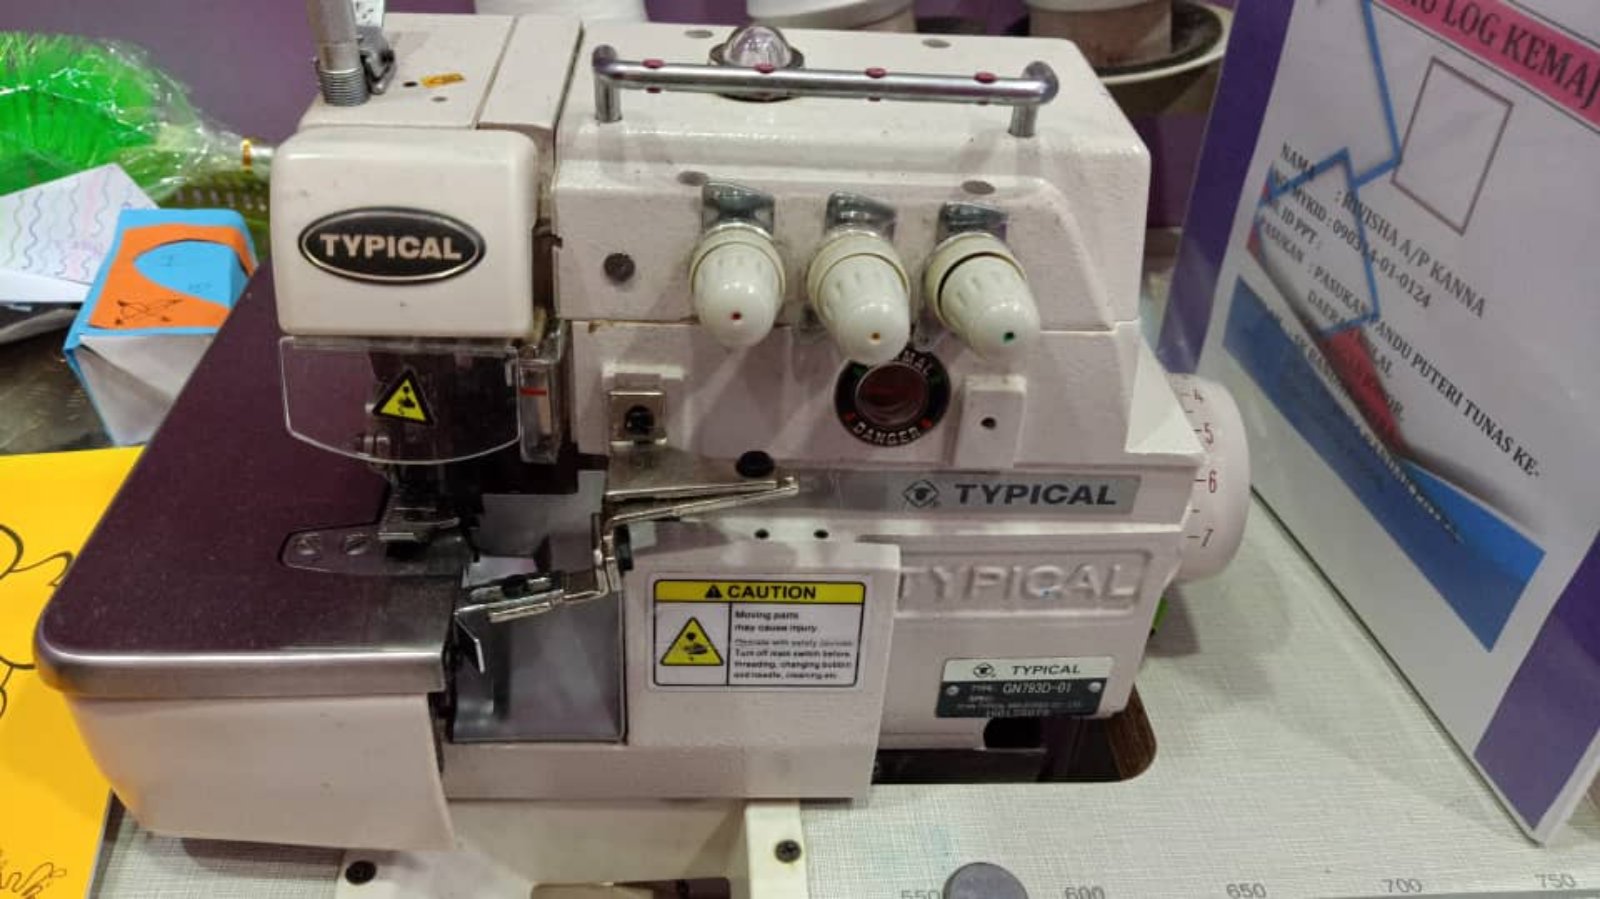 Typical Industrial Overlock Sewing Machine 